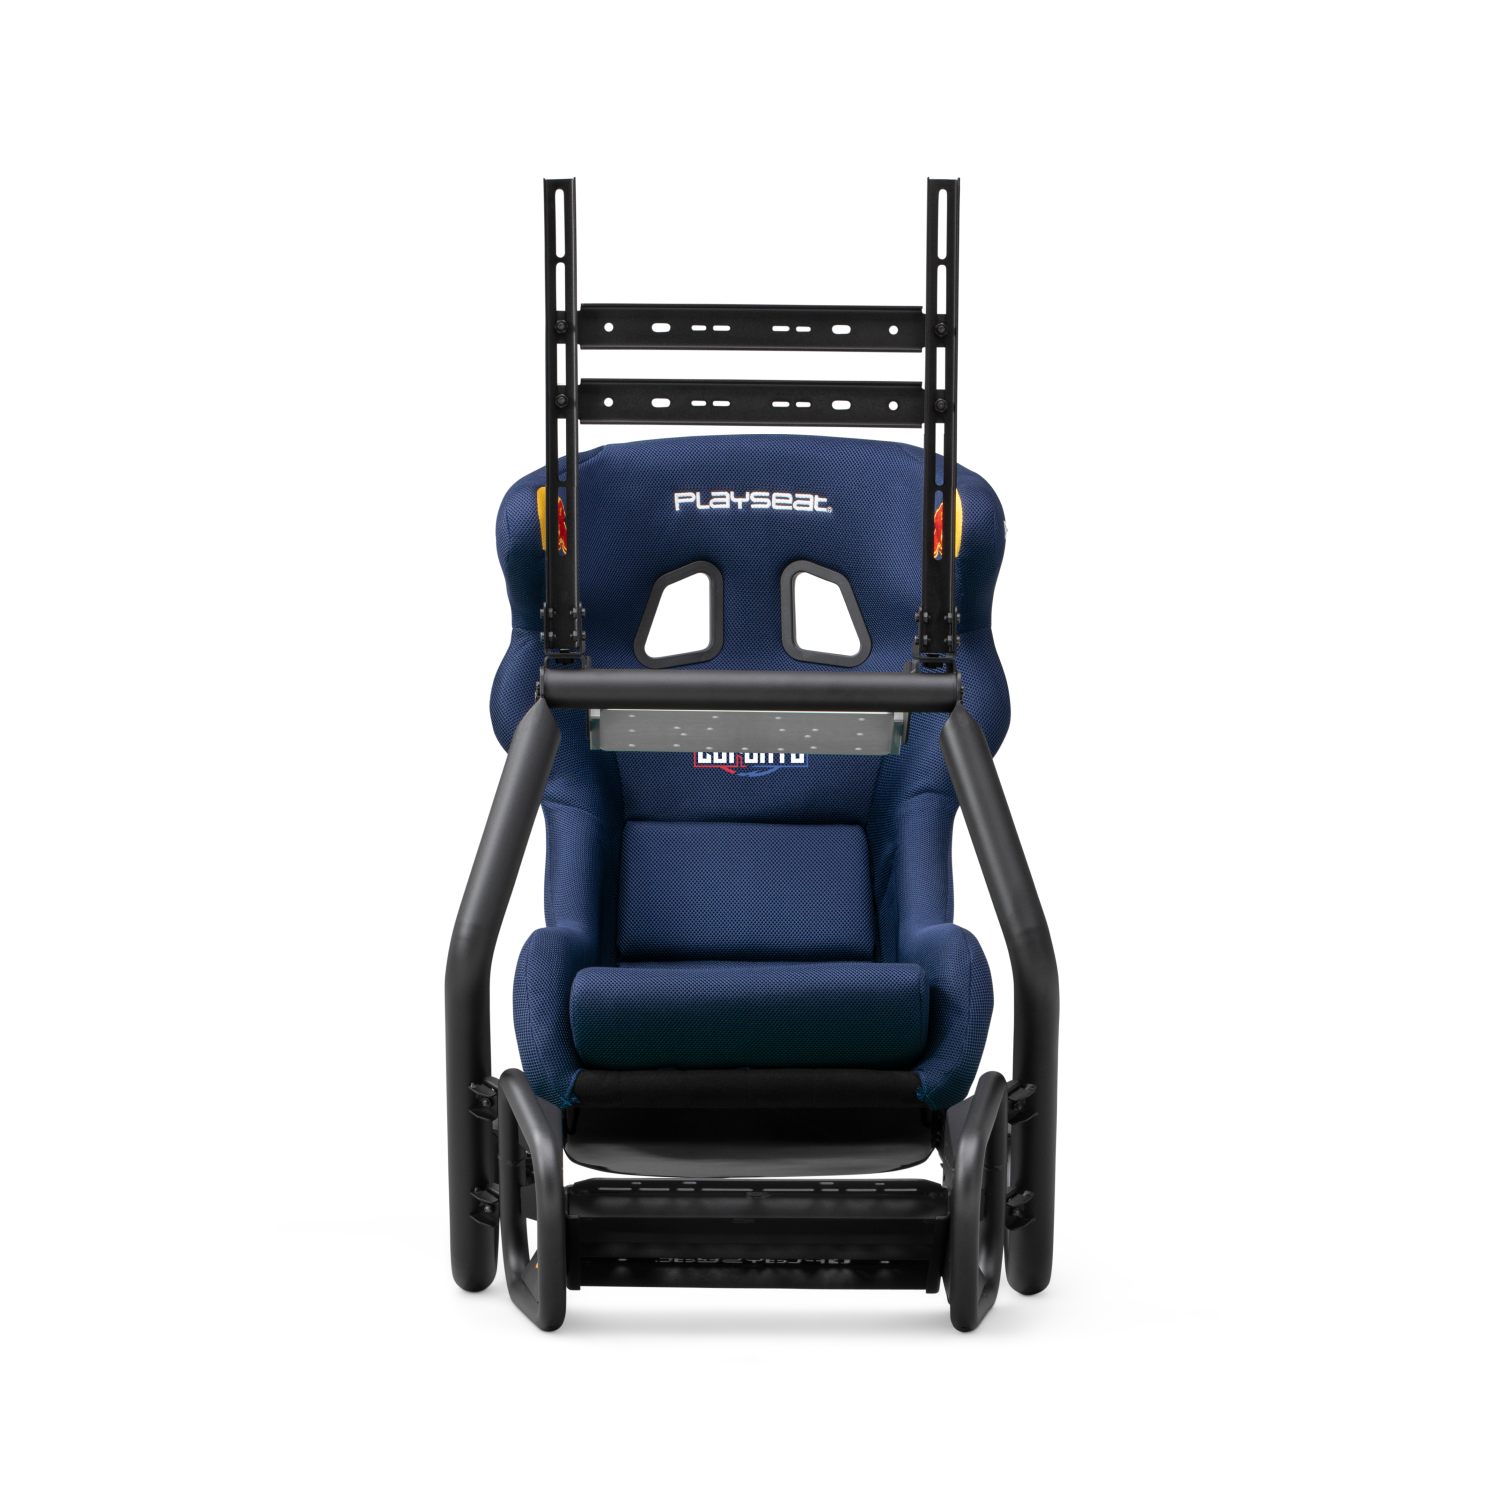 Playseat® on X: The Playseat® Evolution PRO Red Bull Racing Esports  @redbullracingES is build to make you go even faster and brings you even  closer to real racing. Thanks to its design